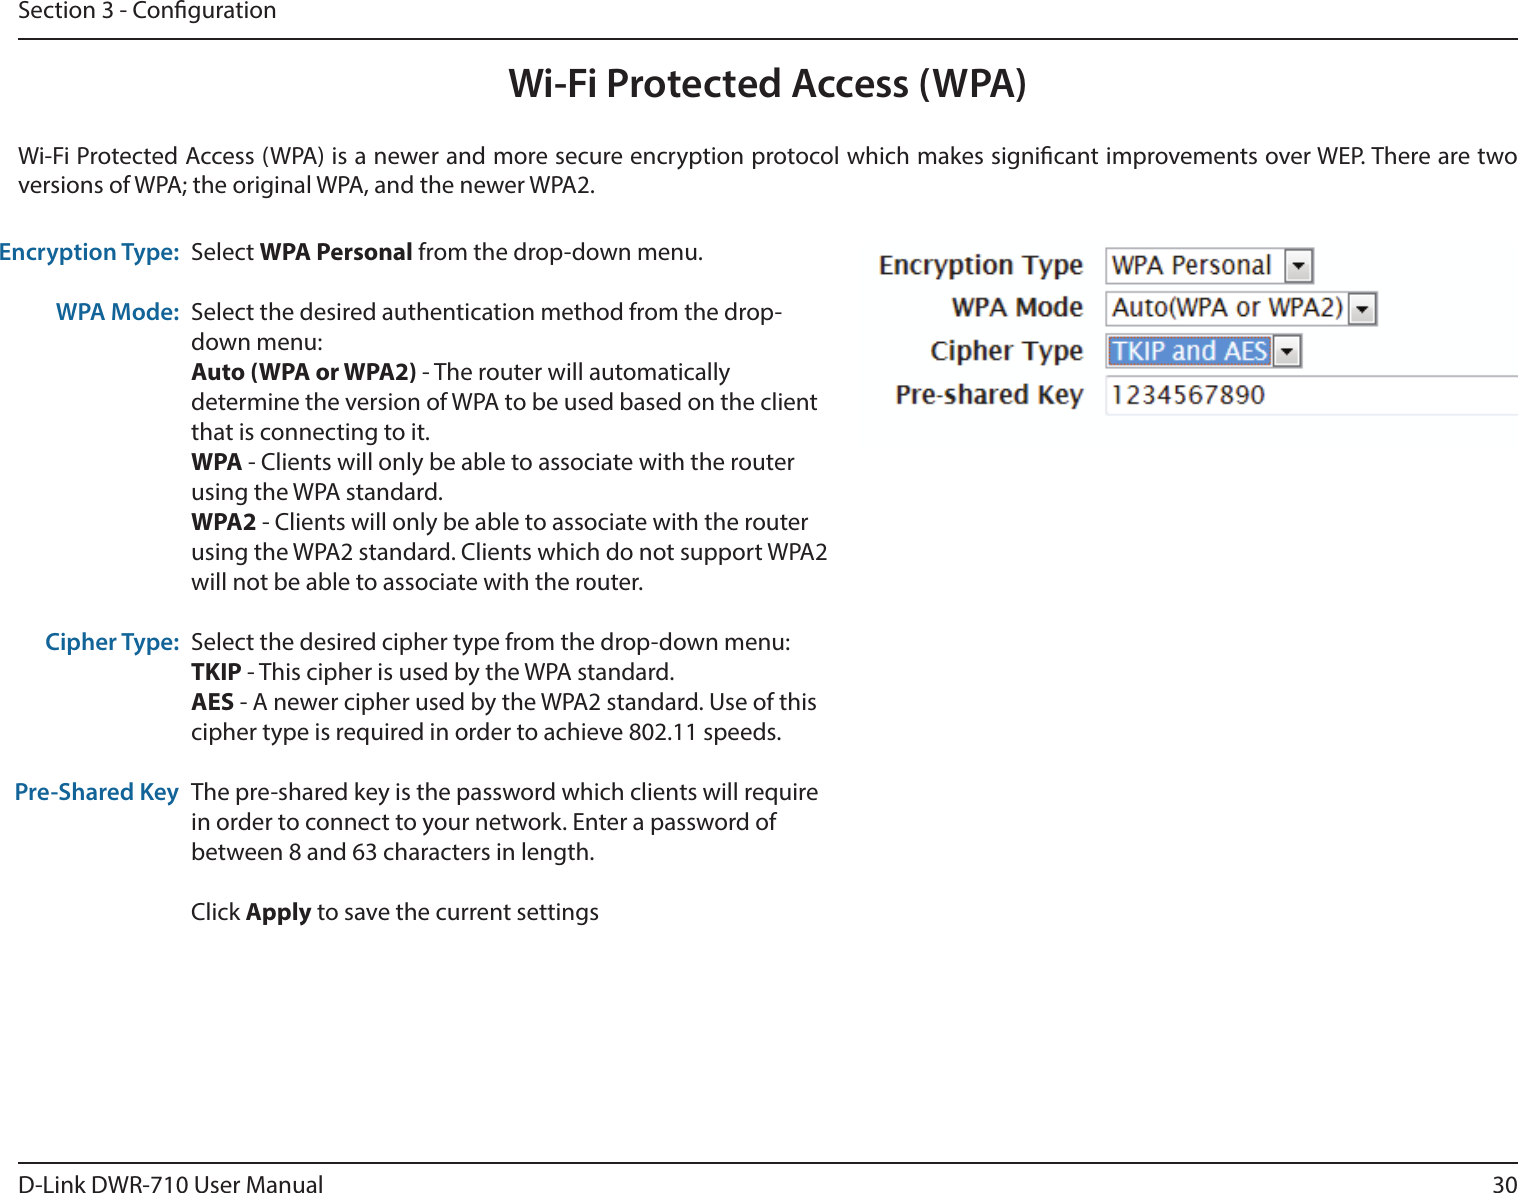 30D-Link DWR-710 User ManualSection 3 - CongurationWi-Fi Protected Access (WPA)Wi-Fi Protected Access (WPA) is a newer and more secure encryption protocol which makes signicant improvements over WEP. There are two versions of WPA; the original WPA, and the newer WPA2. Encryption Type:WPA Mode:Cipher Type:Pre-Shared KeySelect WPA Personal from the drop-down menu.Select the desired authentication method from the drop-down menu:Auto (WPA or WPA2) - The router will automatically determine the version of WPA to be used based on the client that is connecting to it. WPA - Clients will only be able to associate with the router using the WPA standard. WPA2 - Clients will only be able to associate with the router using the WPA2 standard. Clients which do not support WPA2 will not be able to associate with the router. Select the desired cipher type from the drop-down menu:TKIP - This cipher is used by the WPA standard. AES - A newer cipher used by the WPA2 standard. Use of this cipher type is required in order to achieve 802.11 speeds. The pre-shared key is the password which clients will require in order to connect to your network. Enter a password of between 8 and 63 characters in length. Click Apply to save the current settings